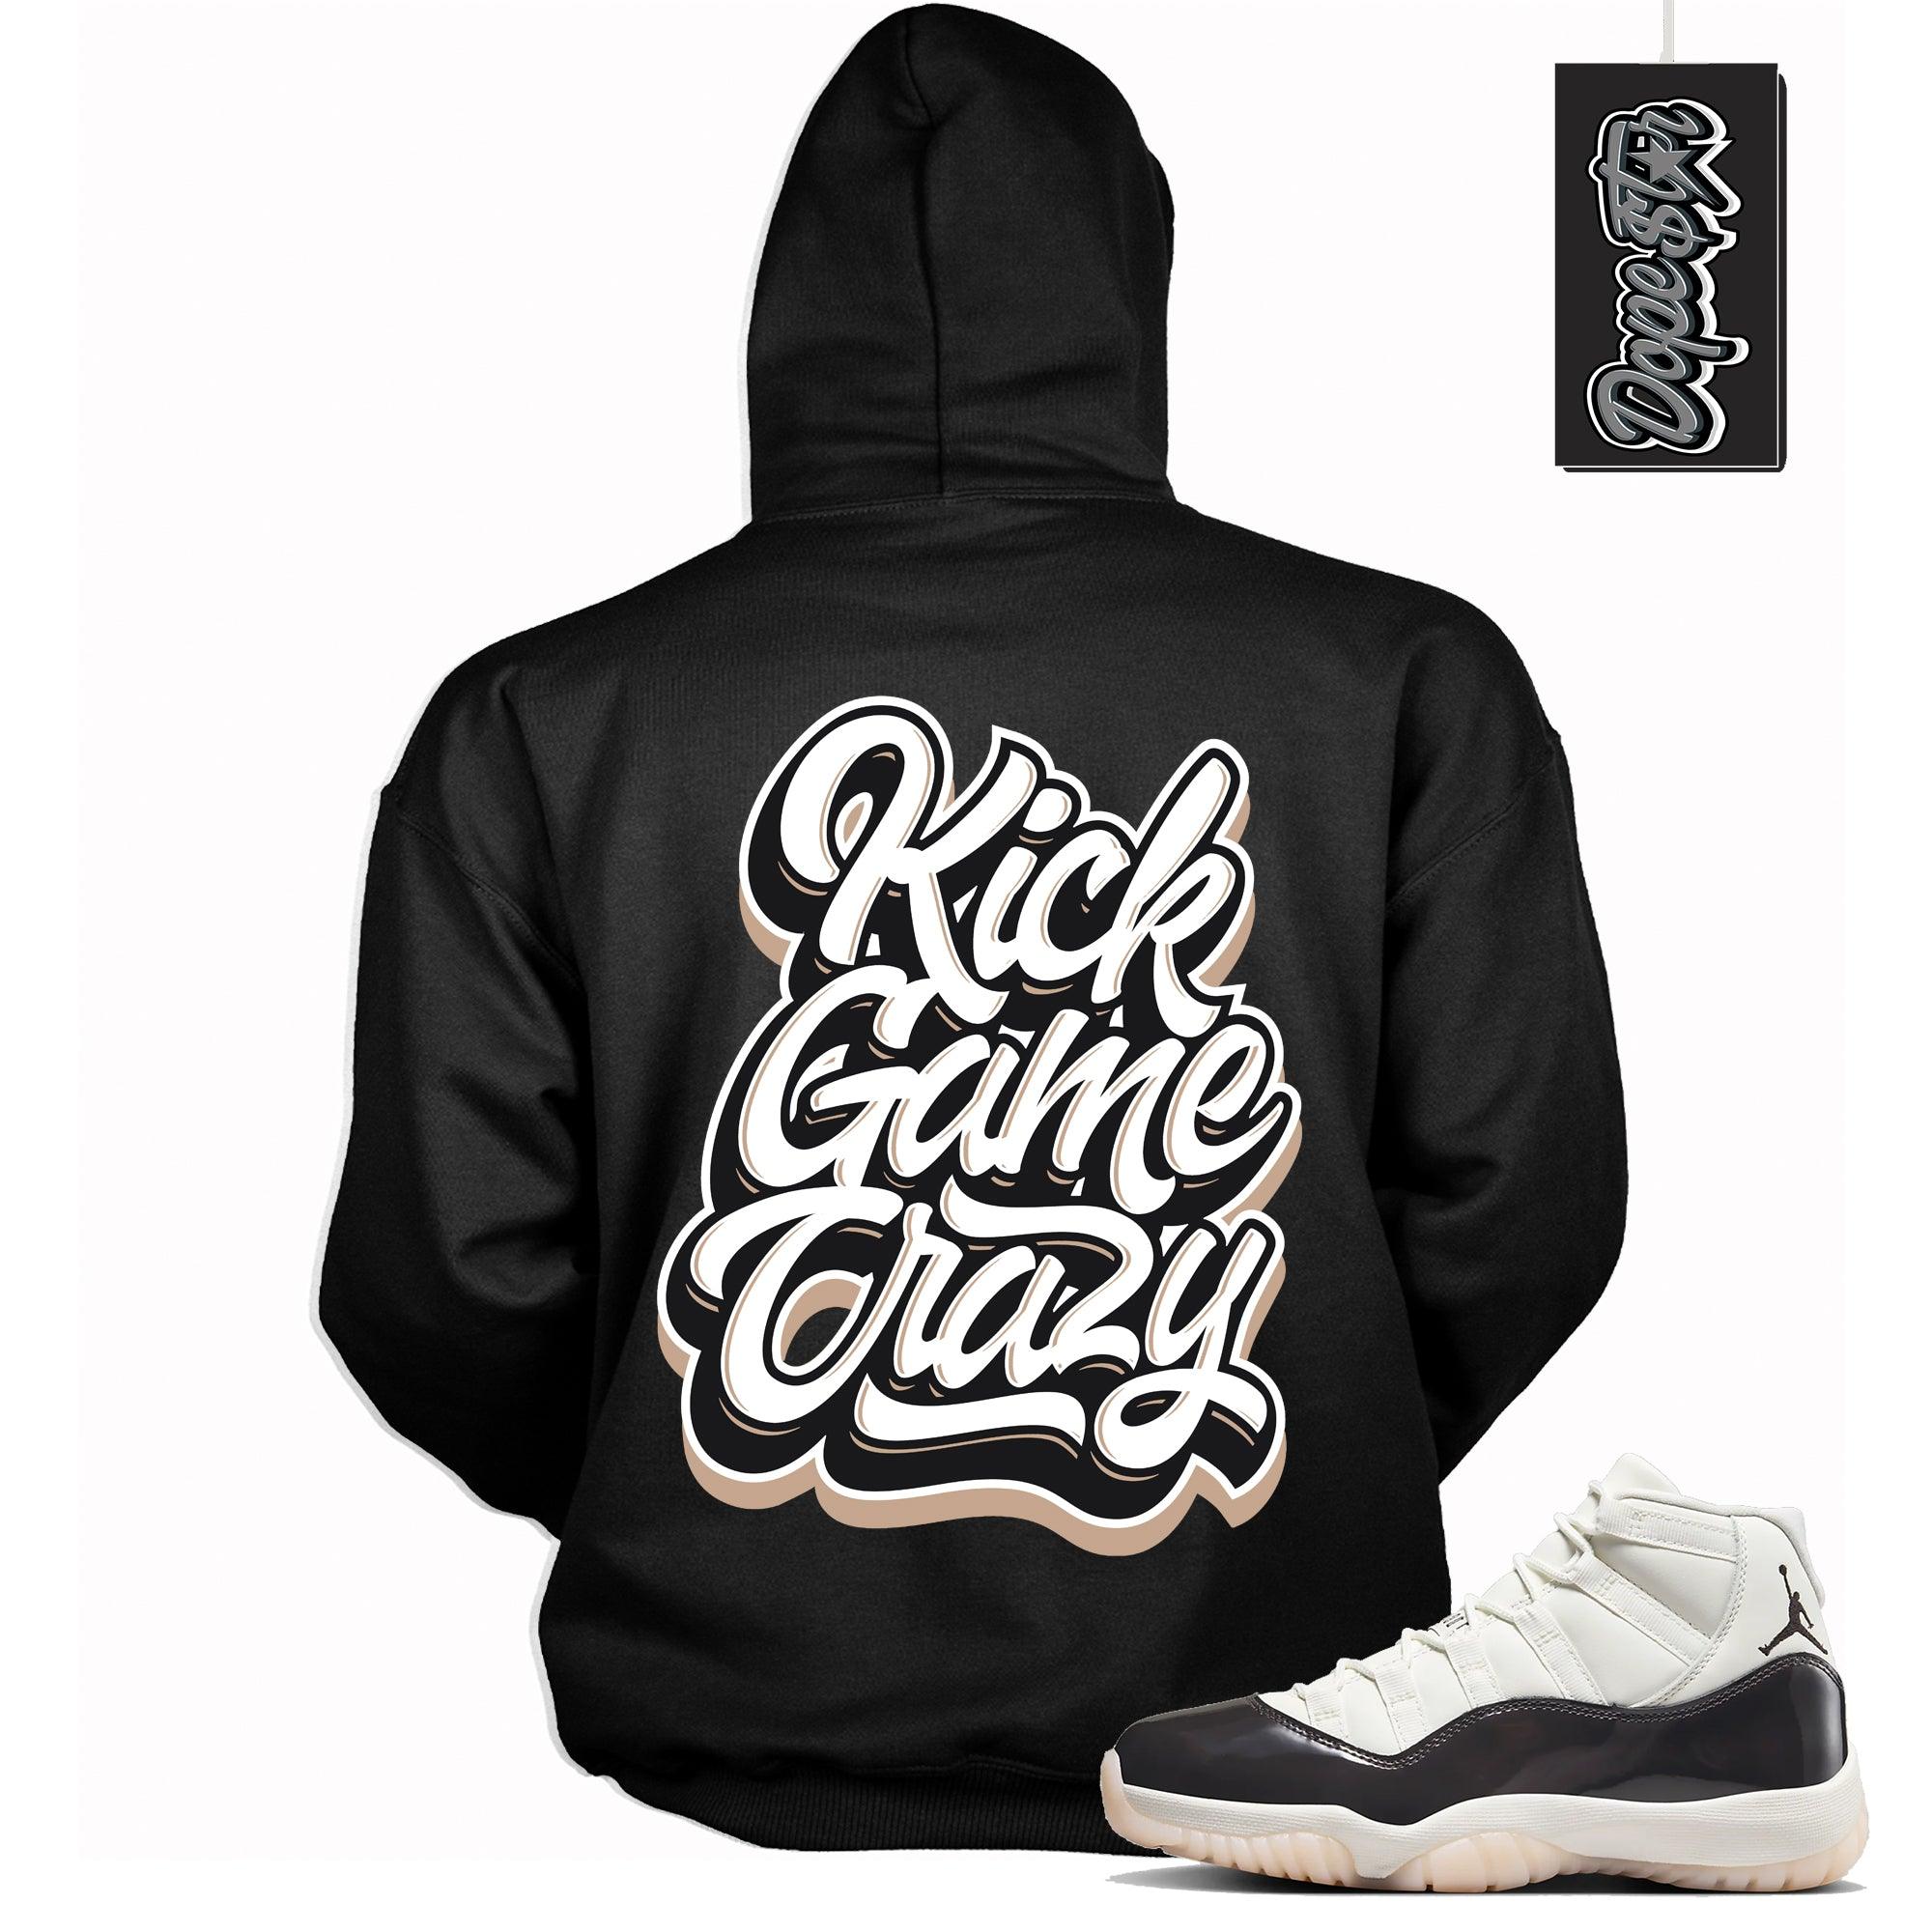 Cool Black Graphic Hoodie with “ Kick Game Crazy “ print, that perfectly matches Air Jordan 11 Neapolitan sneakers